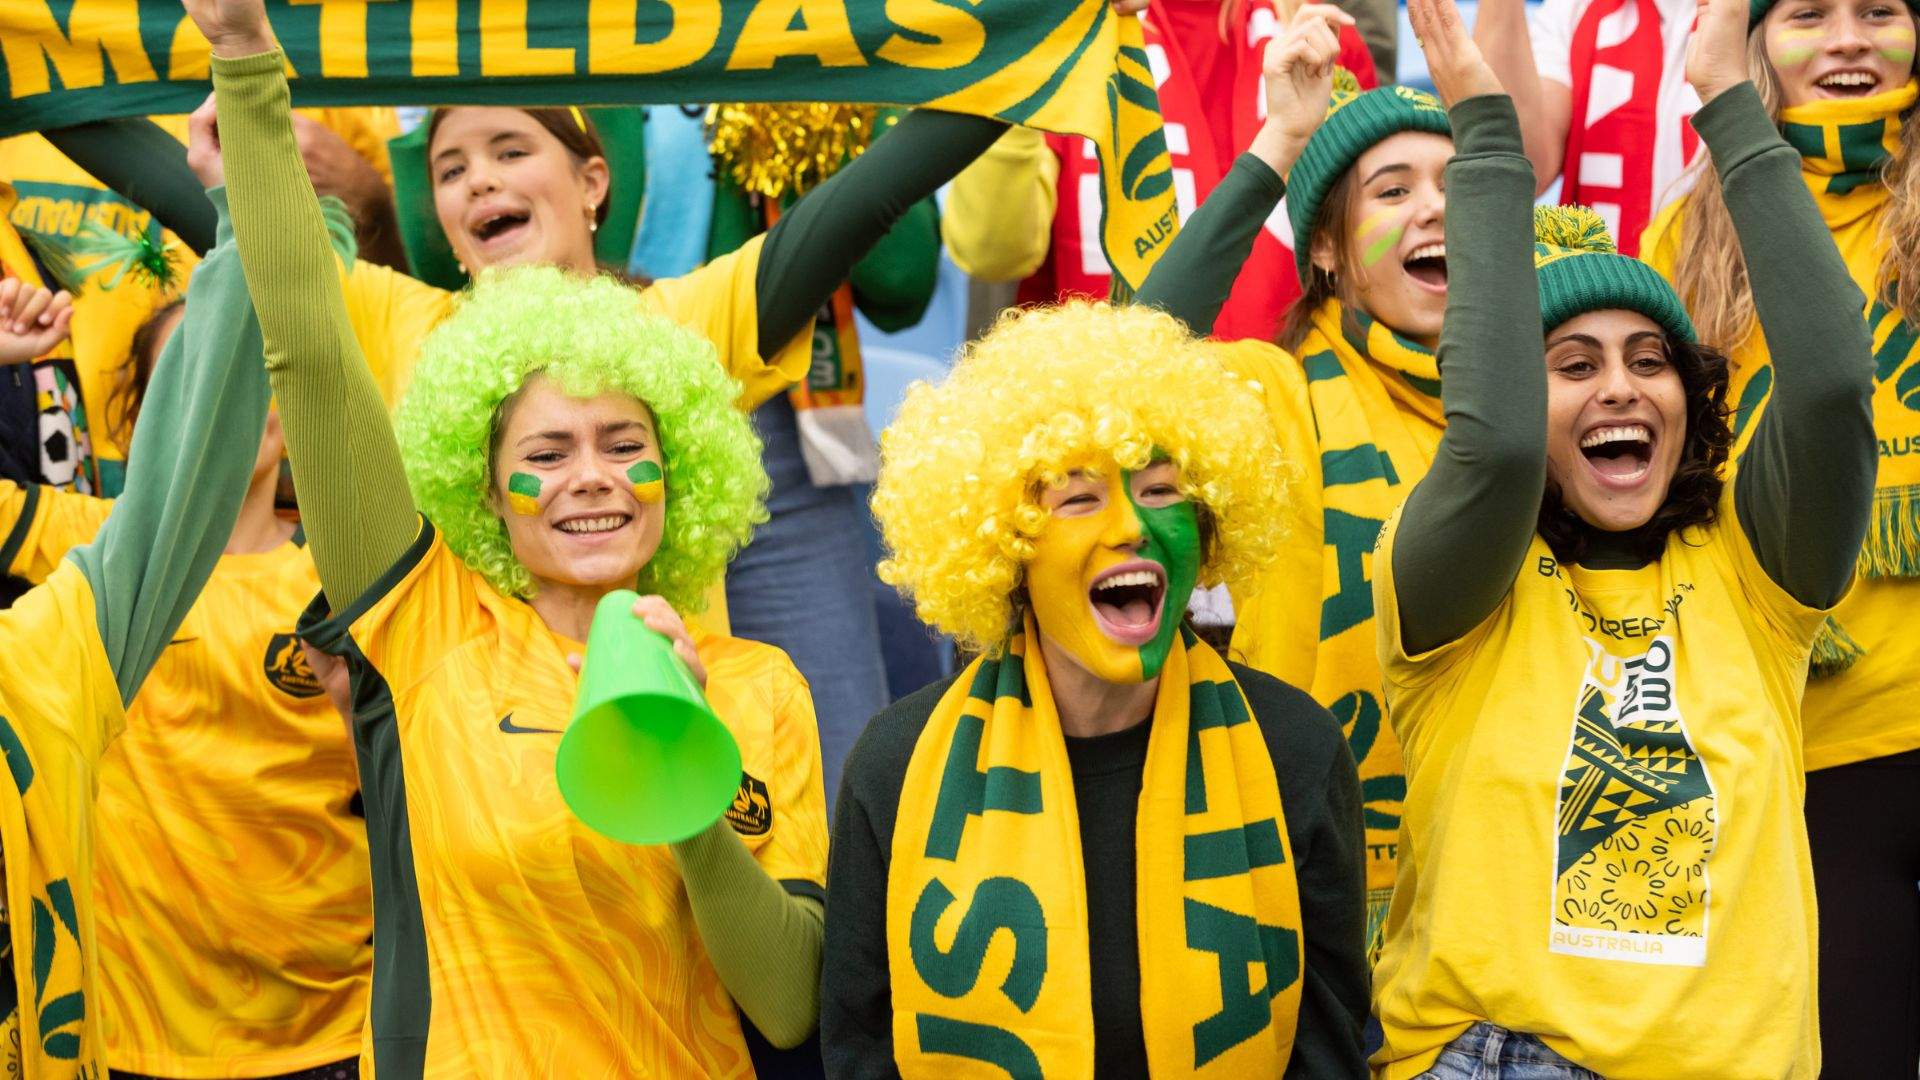 Reimagined FIFA Fan Festival to Debut at 2022 World Cup – SportsTravel